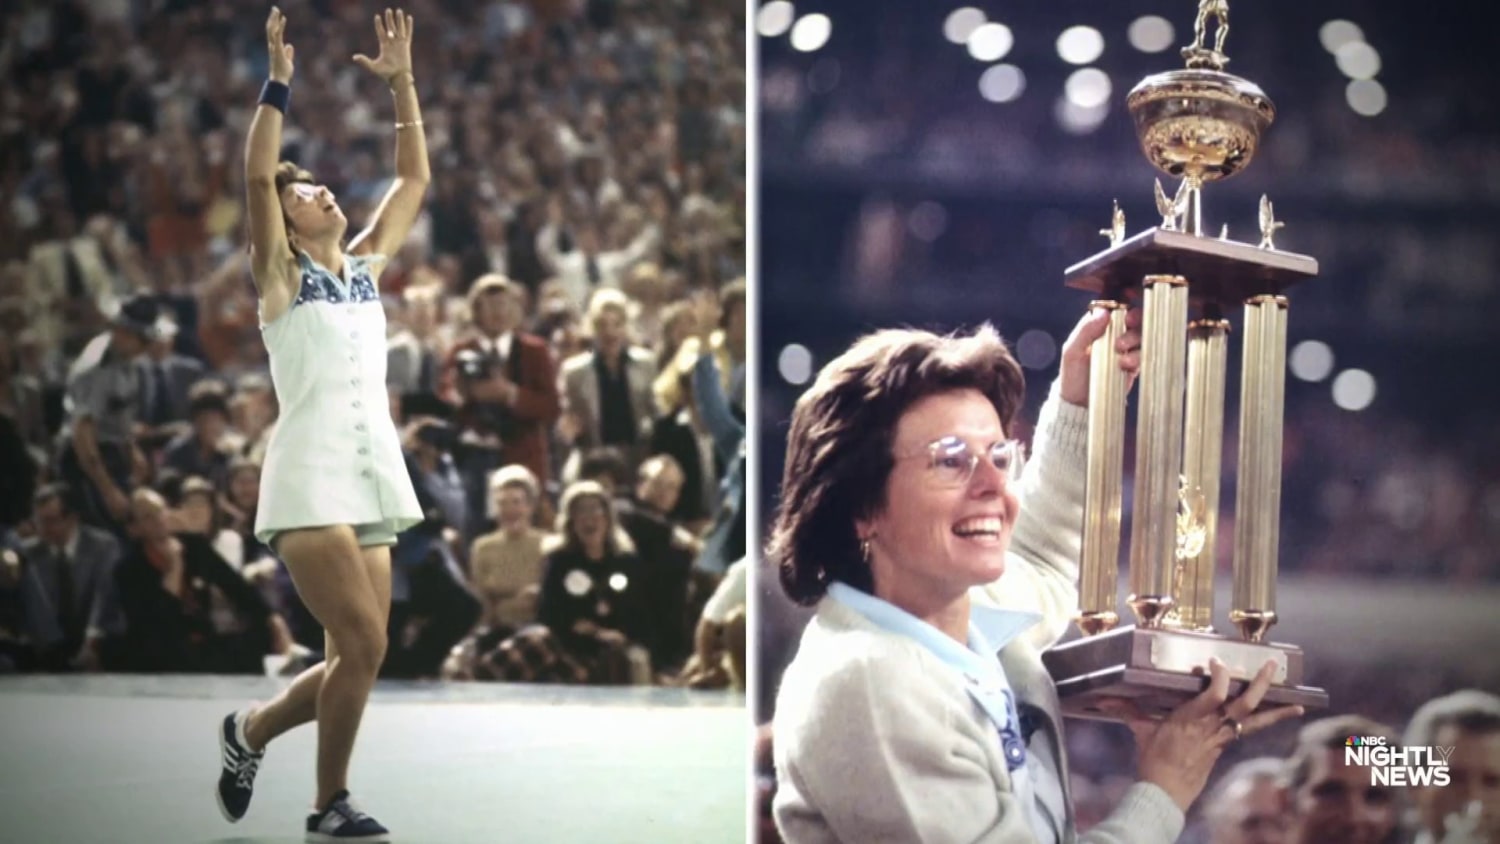 Who remembers the 'Battle of the Sexes' tennis match in 1973?